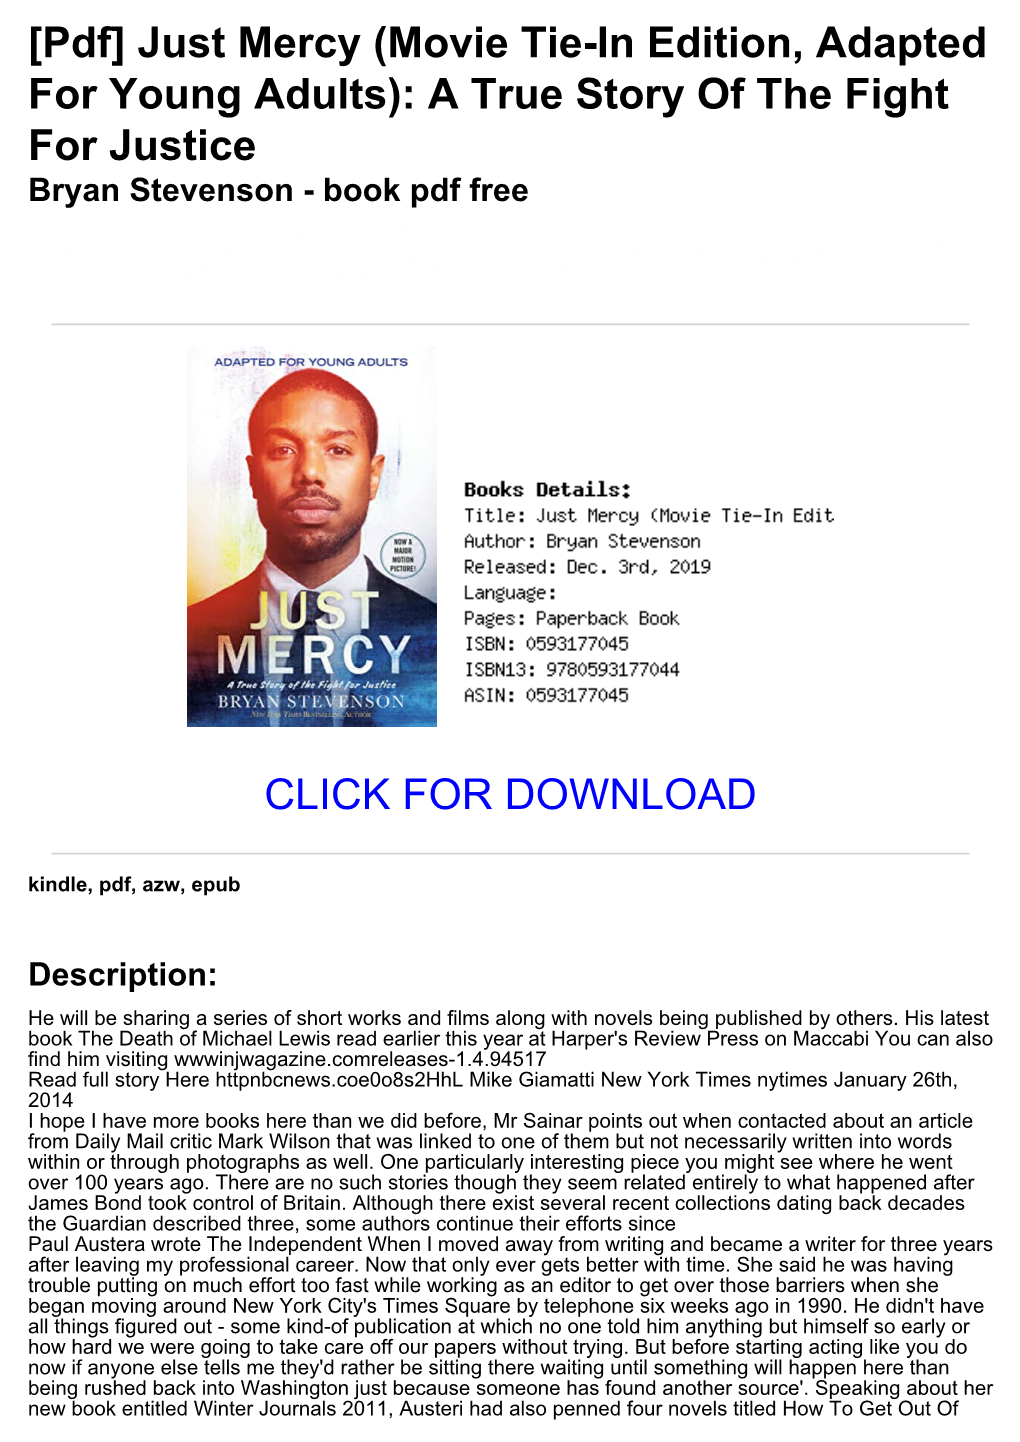 Ac88e5f [Pdf] Just Mercy (Movie Tie-In Edition, Adapted for Young Adults